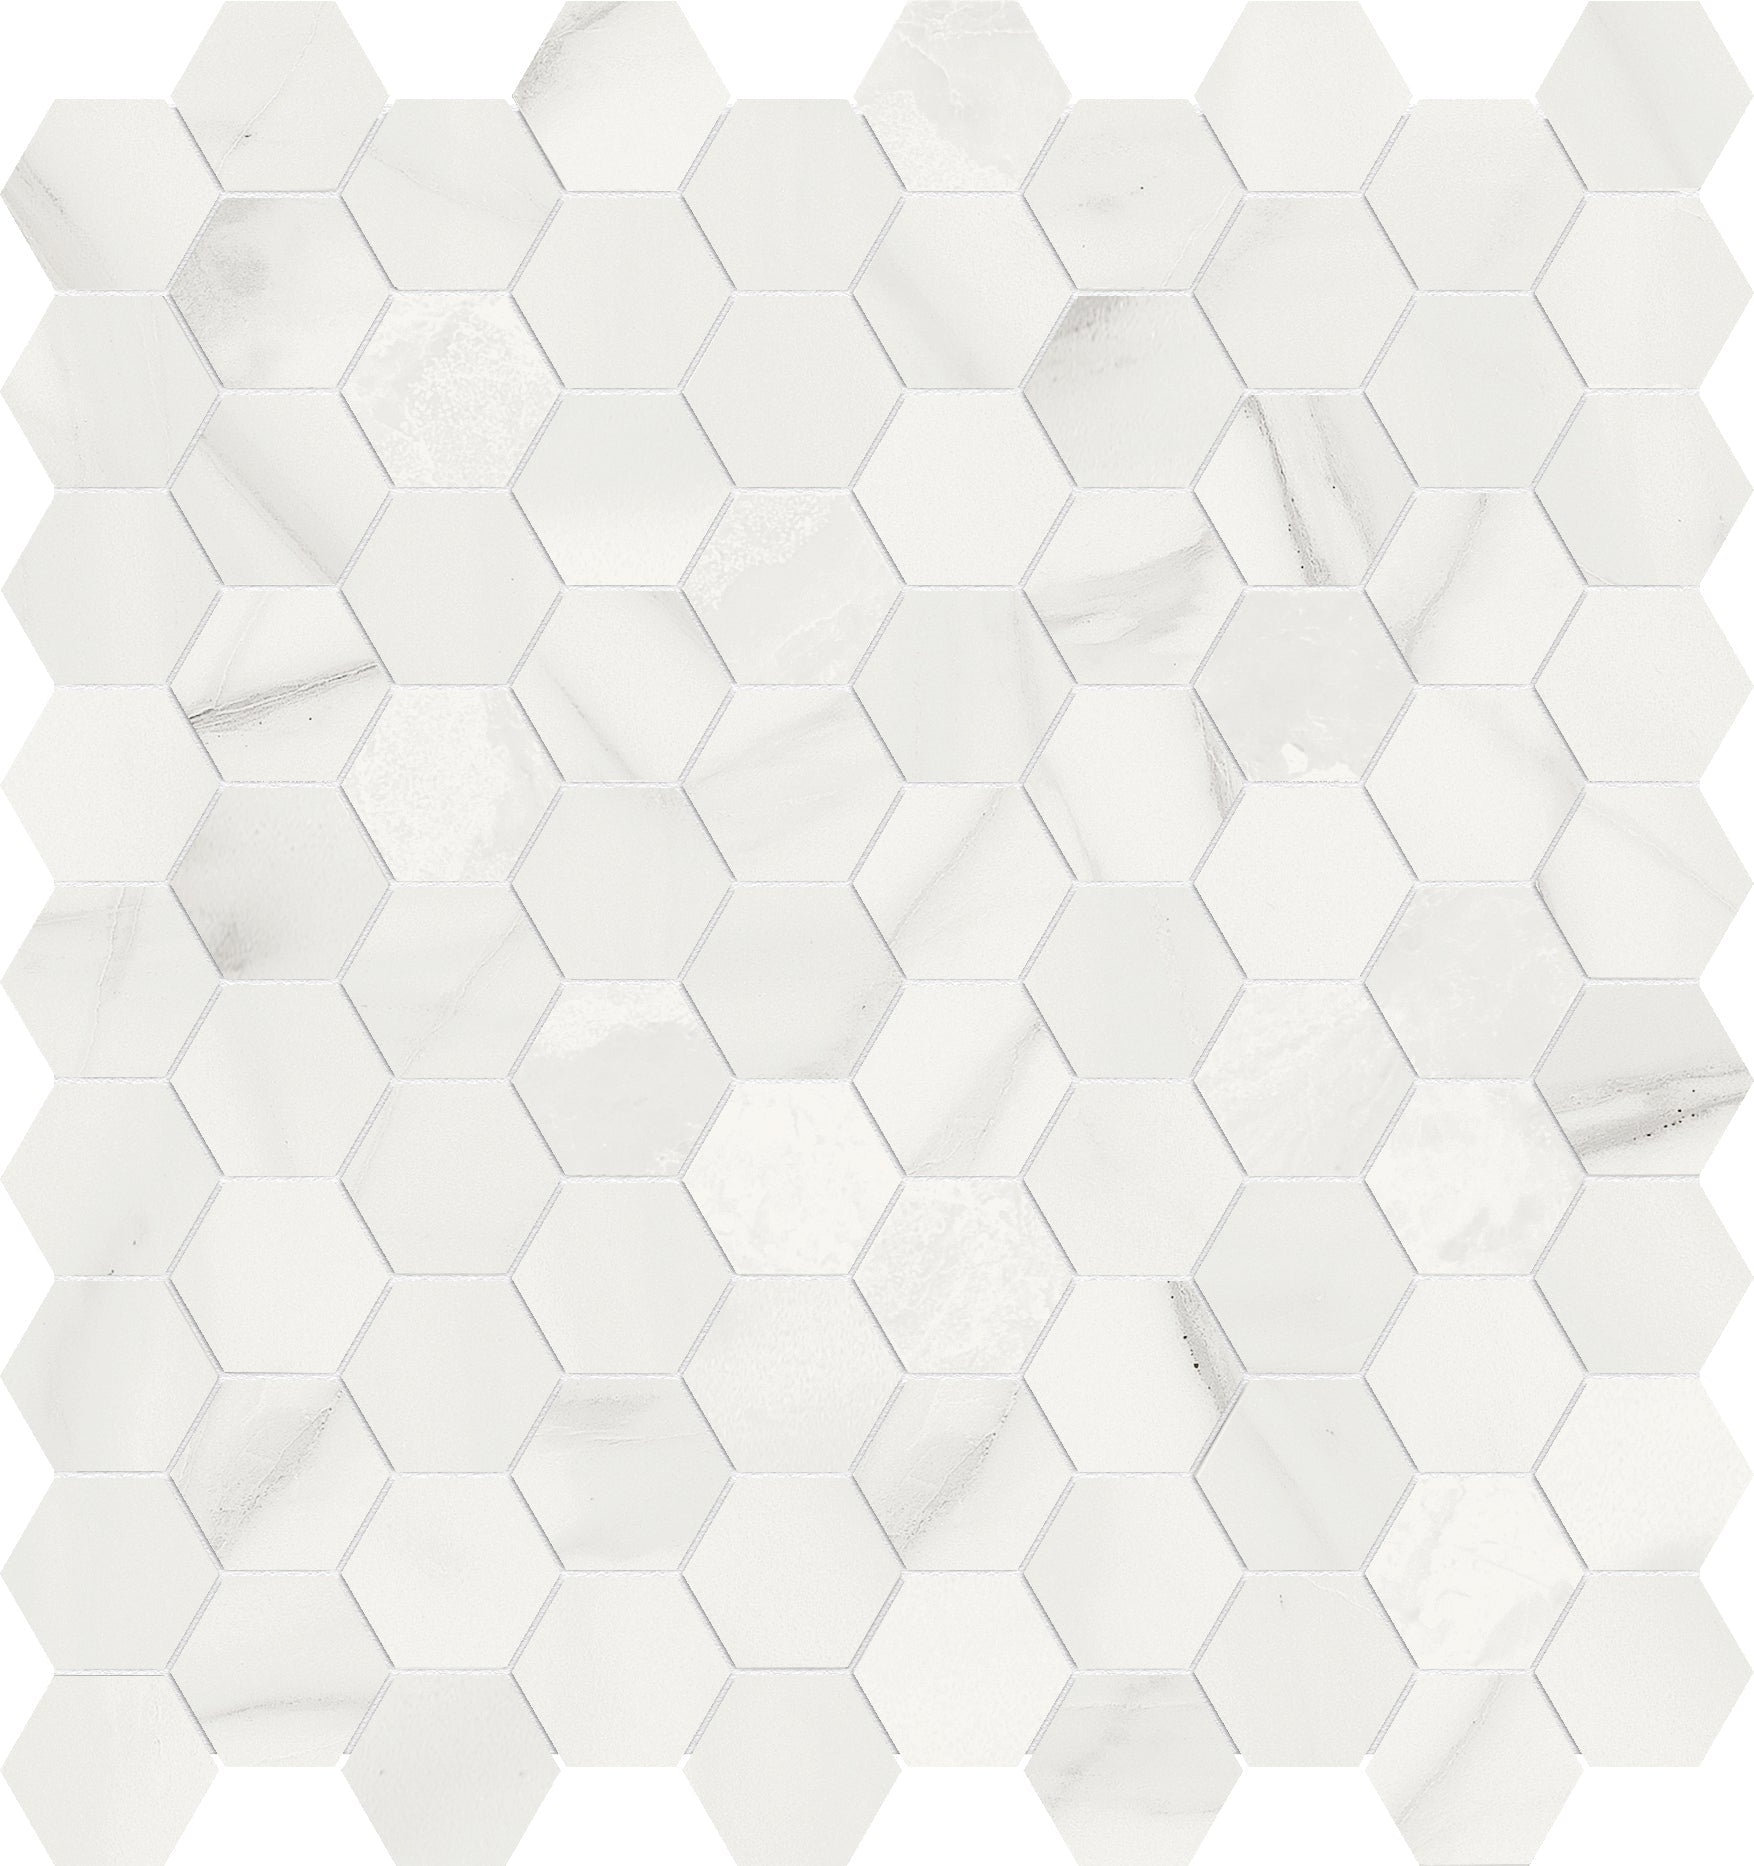 volakas grigio hexagon 1&25-inch pattern glazed porcelain mosaic from mayfair anatolia collection distributed by surface group international polished finish straight edge edge mesh shape